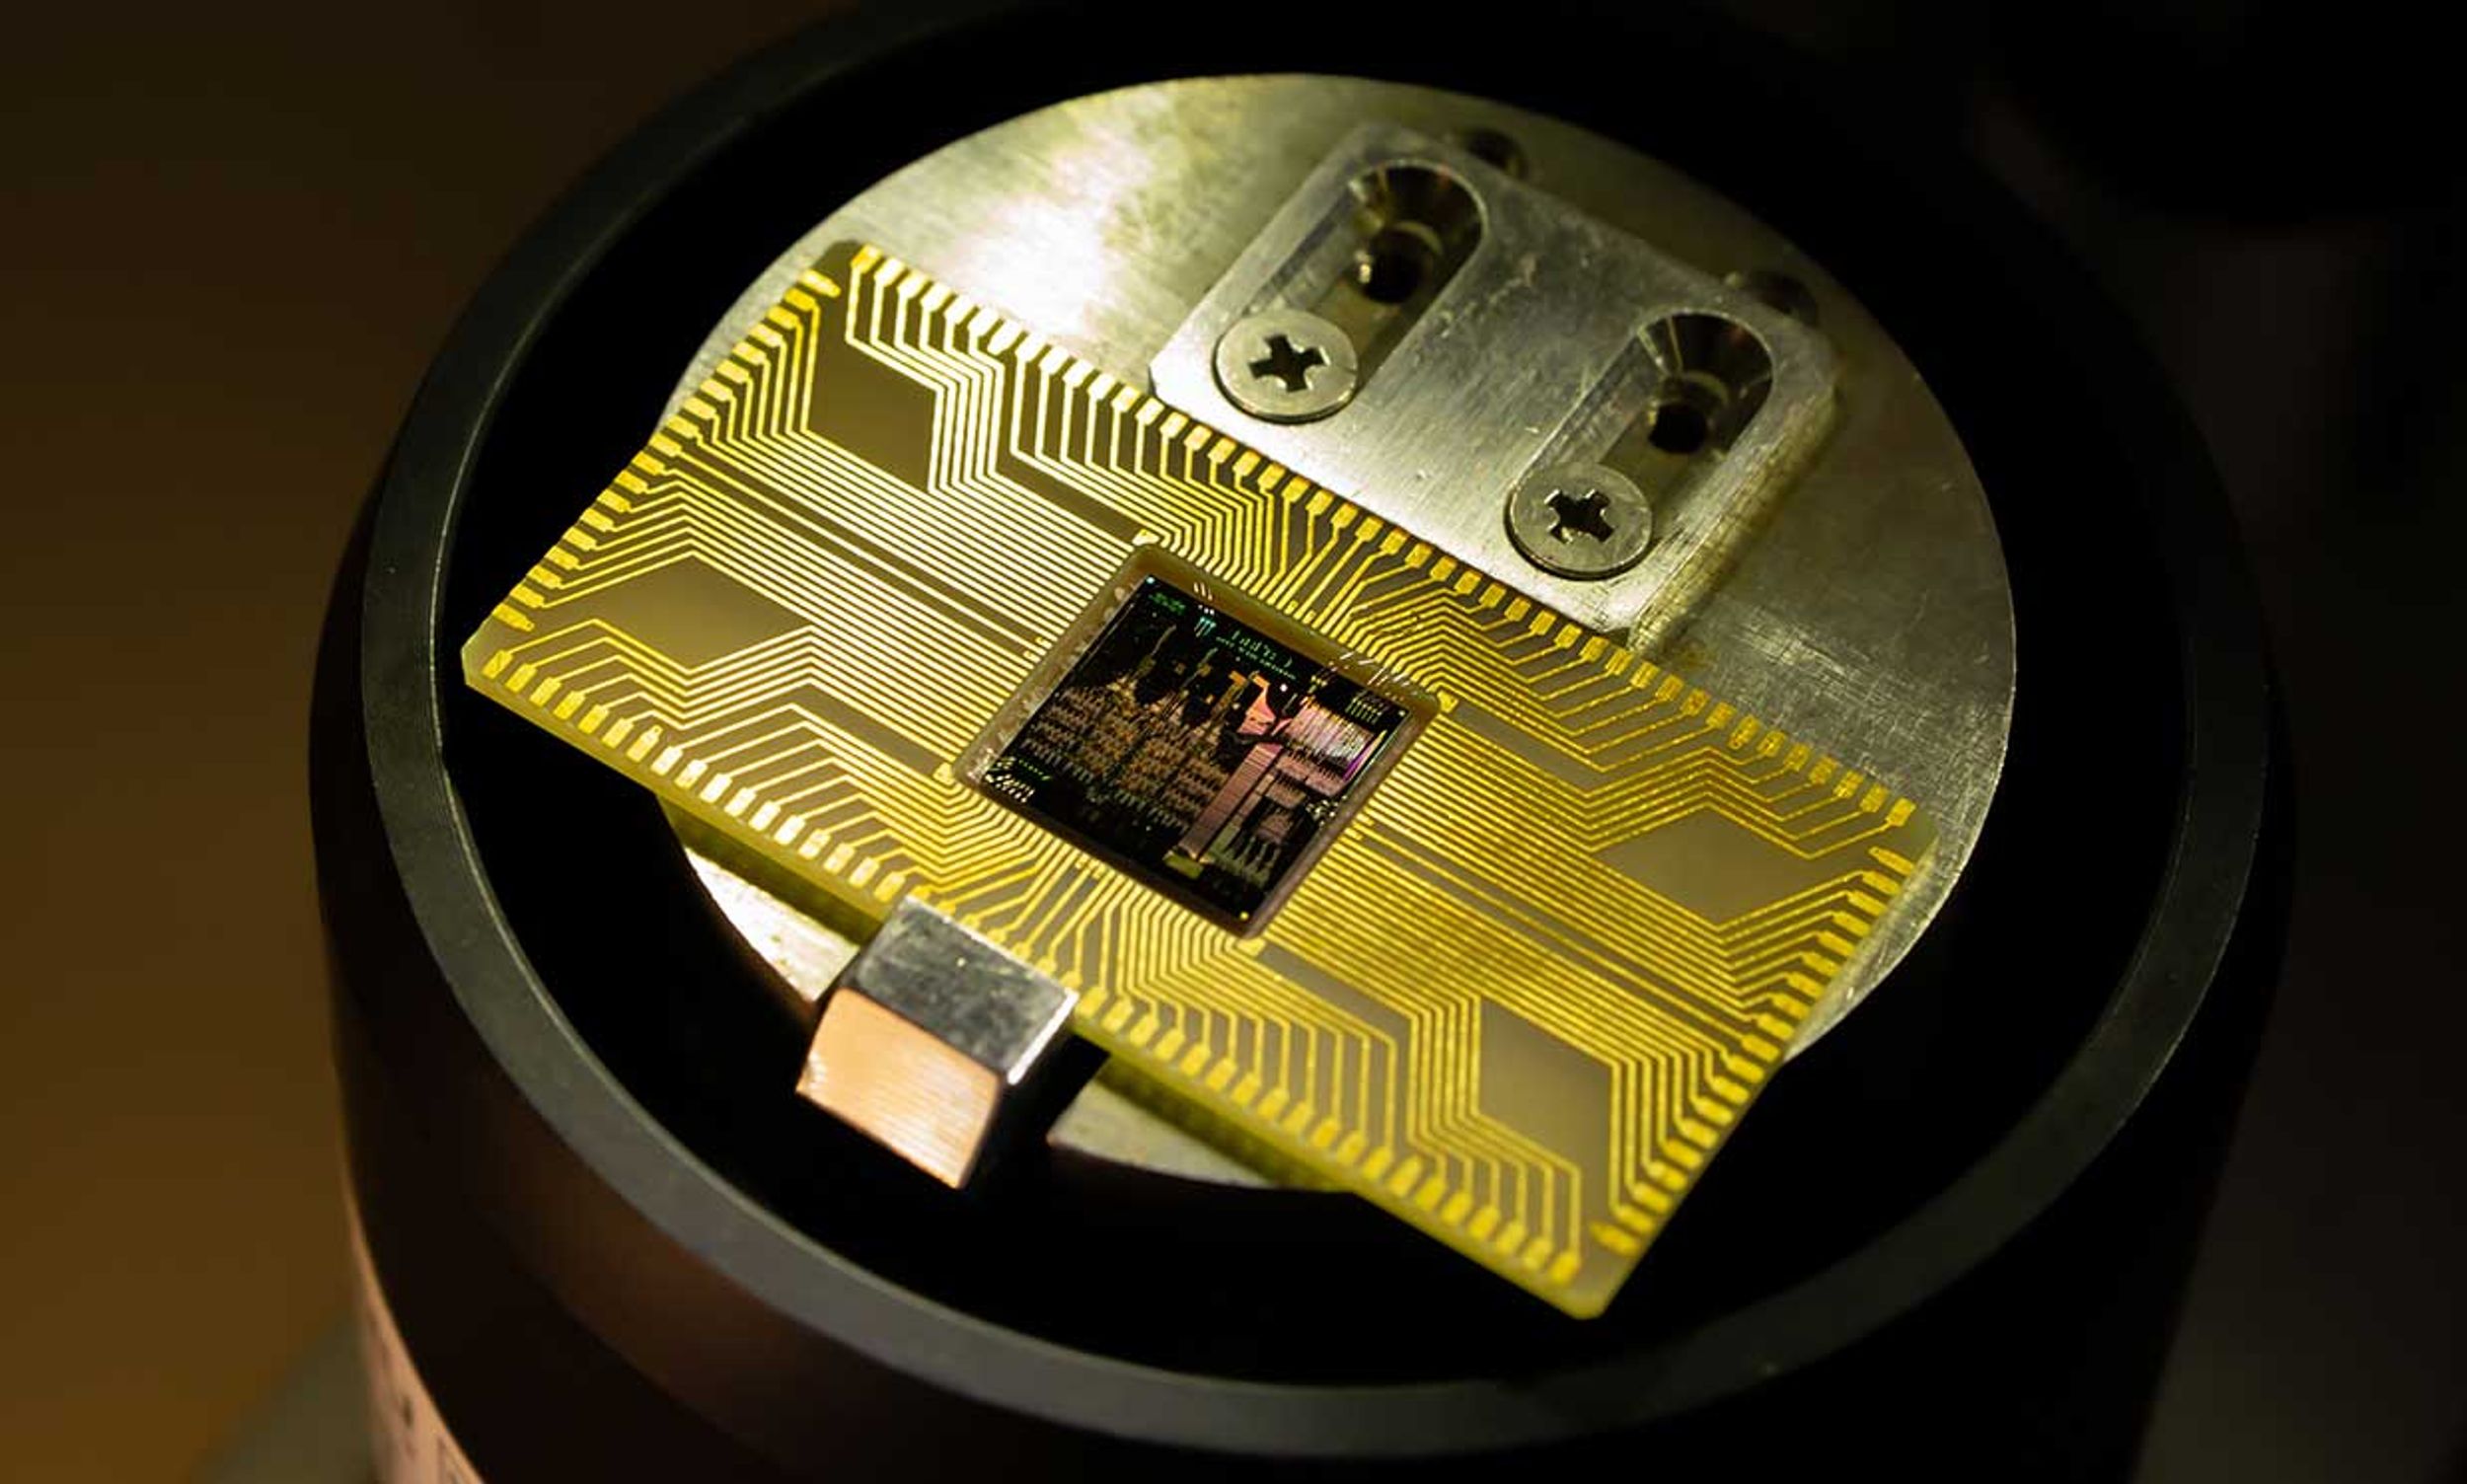 The AQFP-based MANA microprocessor seated on a chip holder.